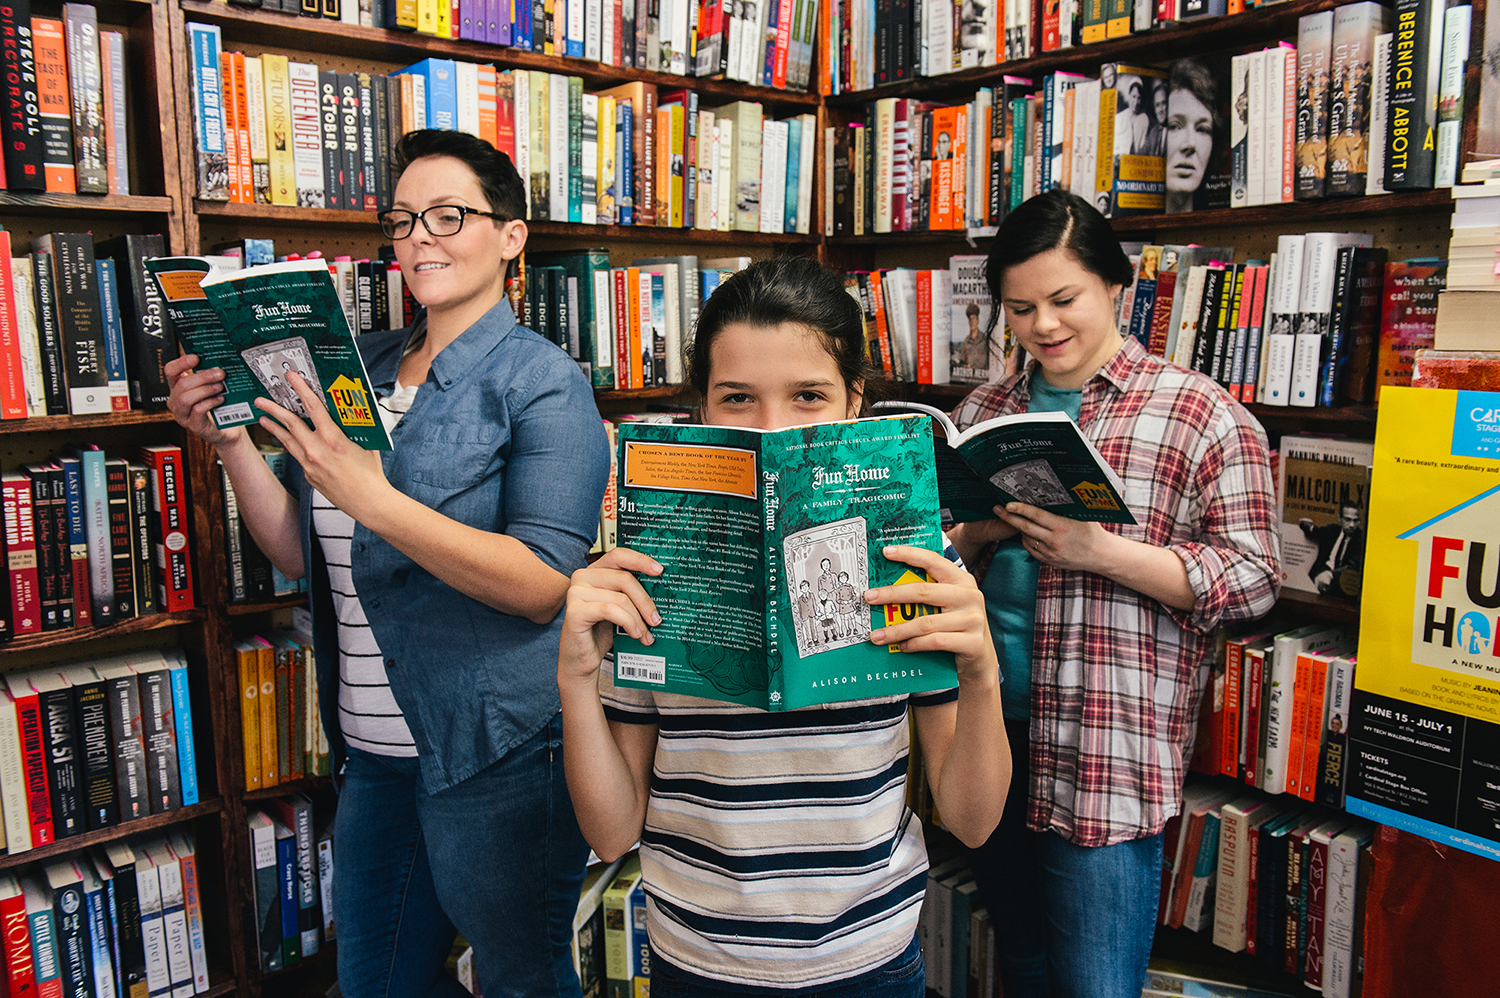 Cardinal Stage has partnered with several local book stores and is hosting a 'Fun Home' book club prior to the June 20 performance.